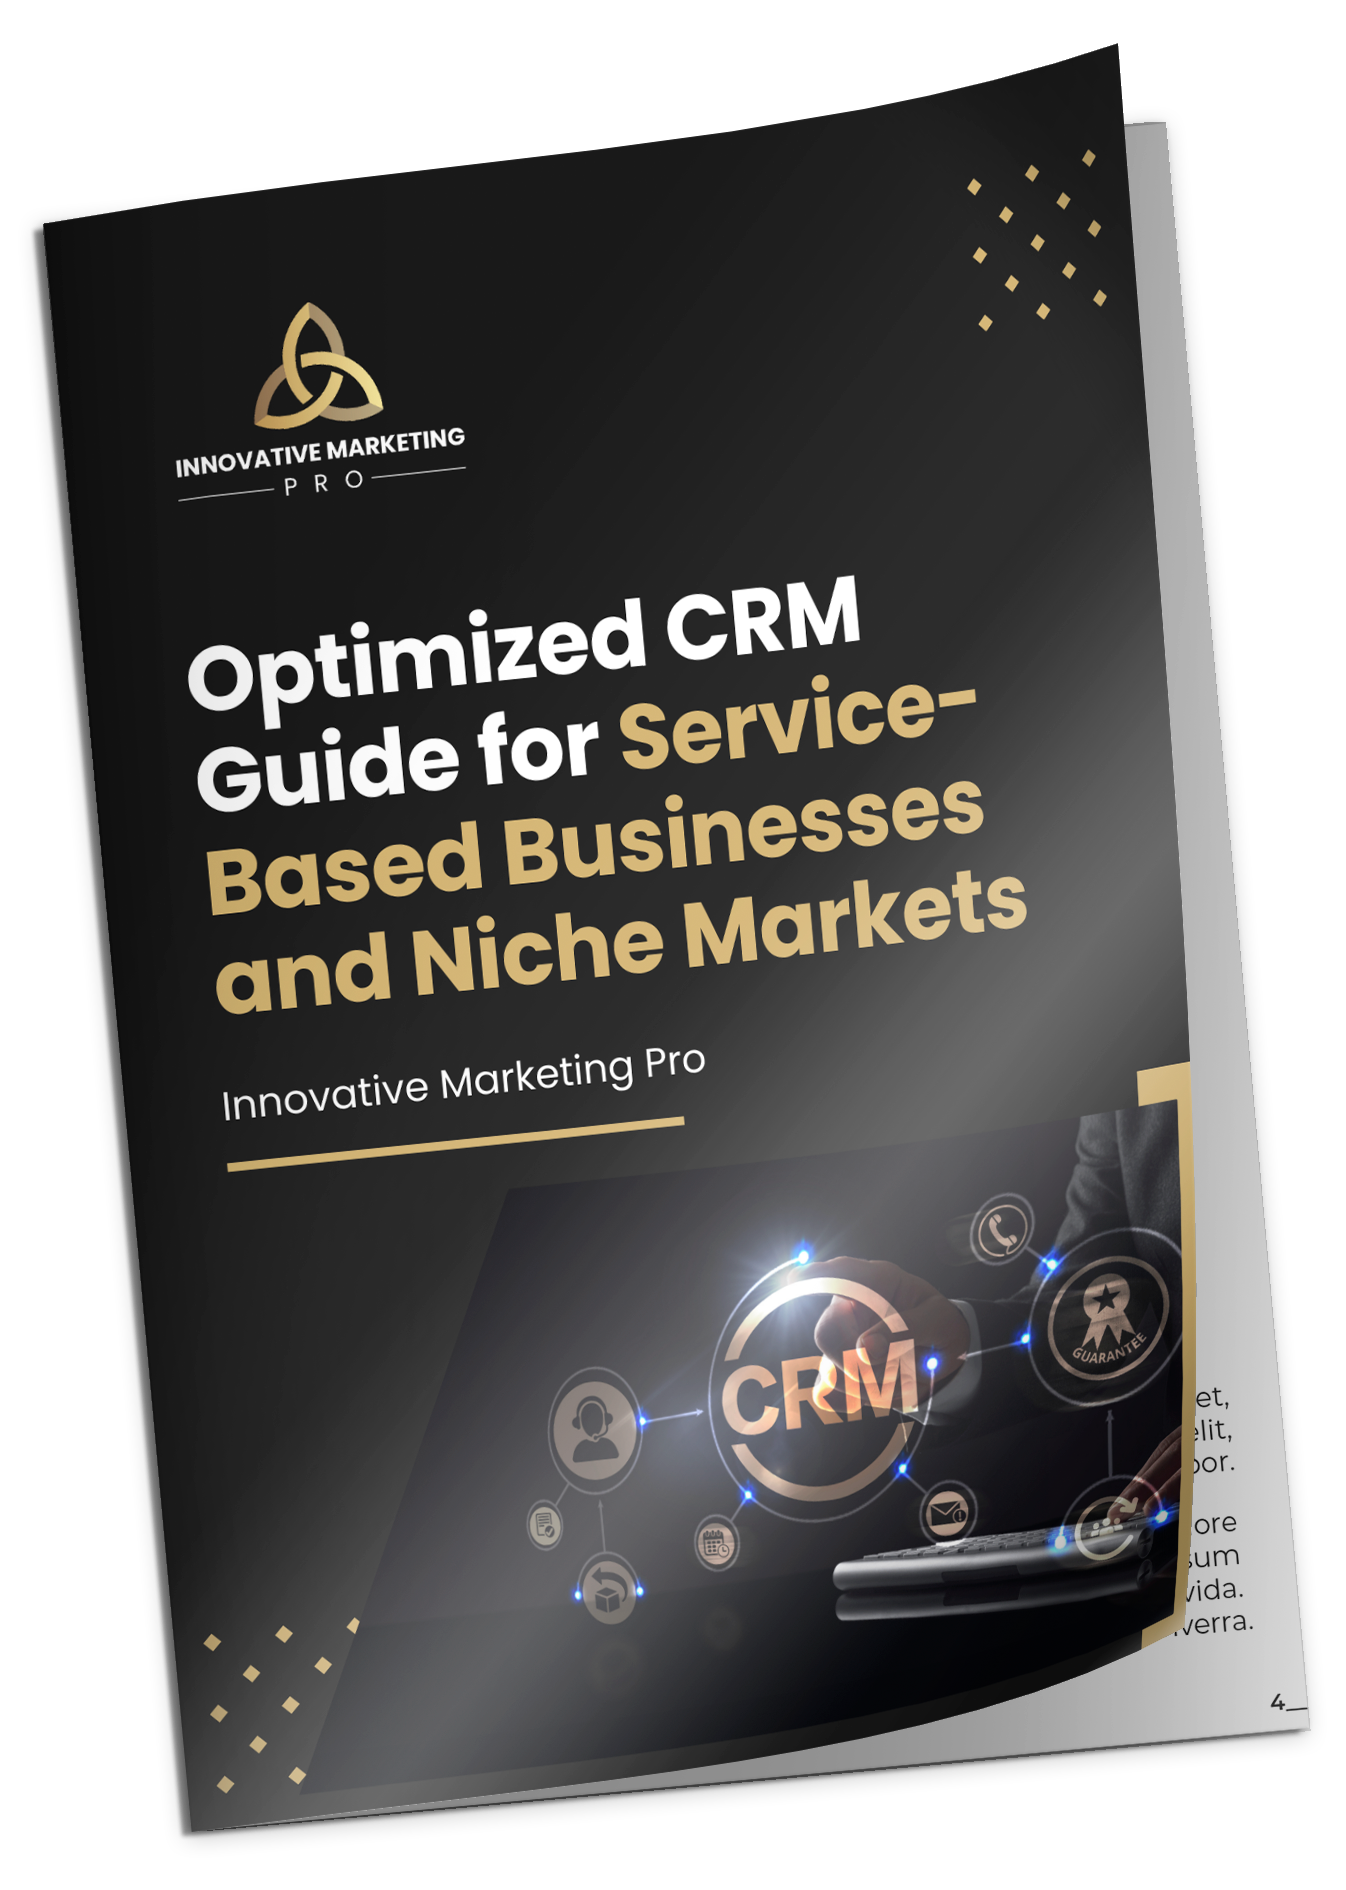 Optimized CRM Guide For Service-Based Business and Niche Markets